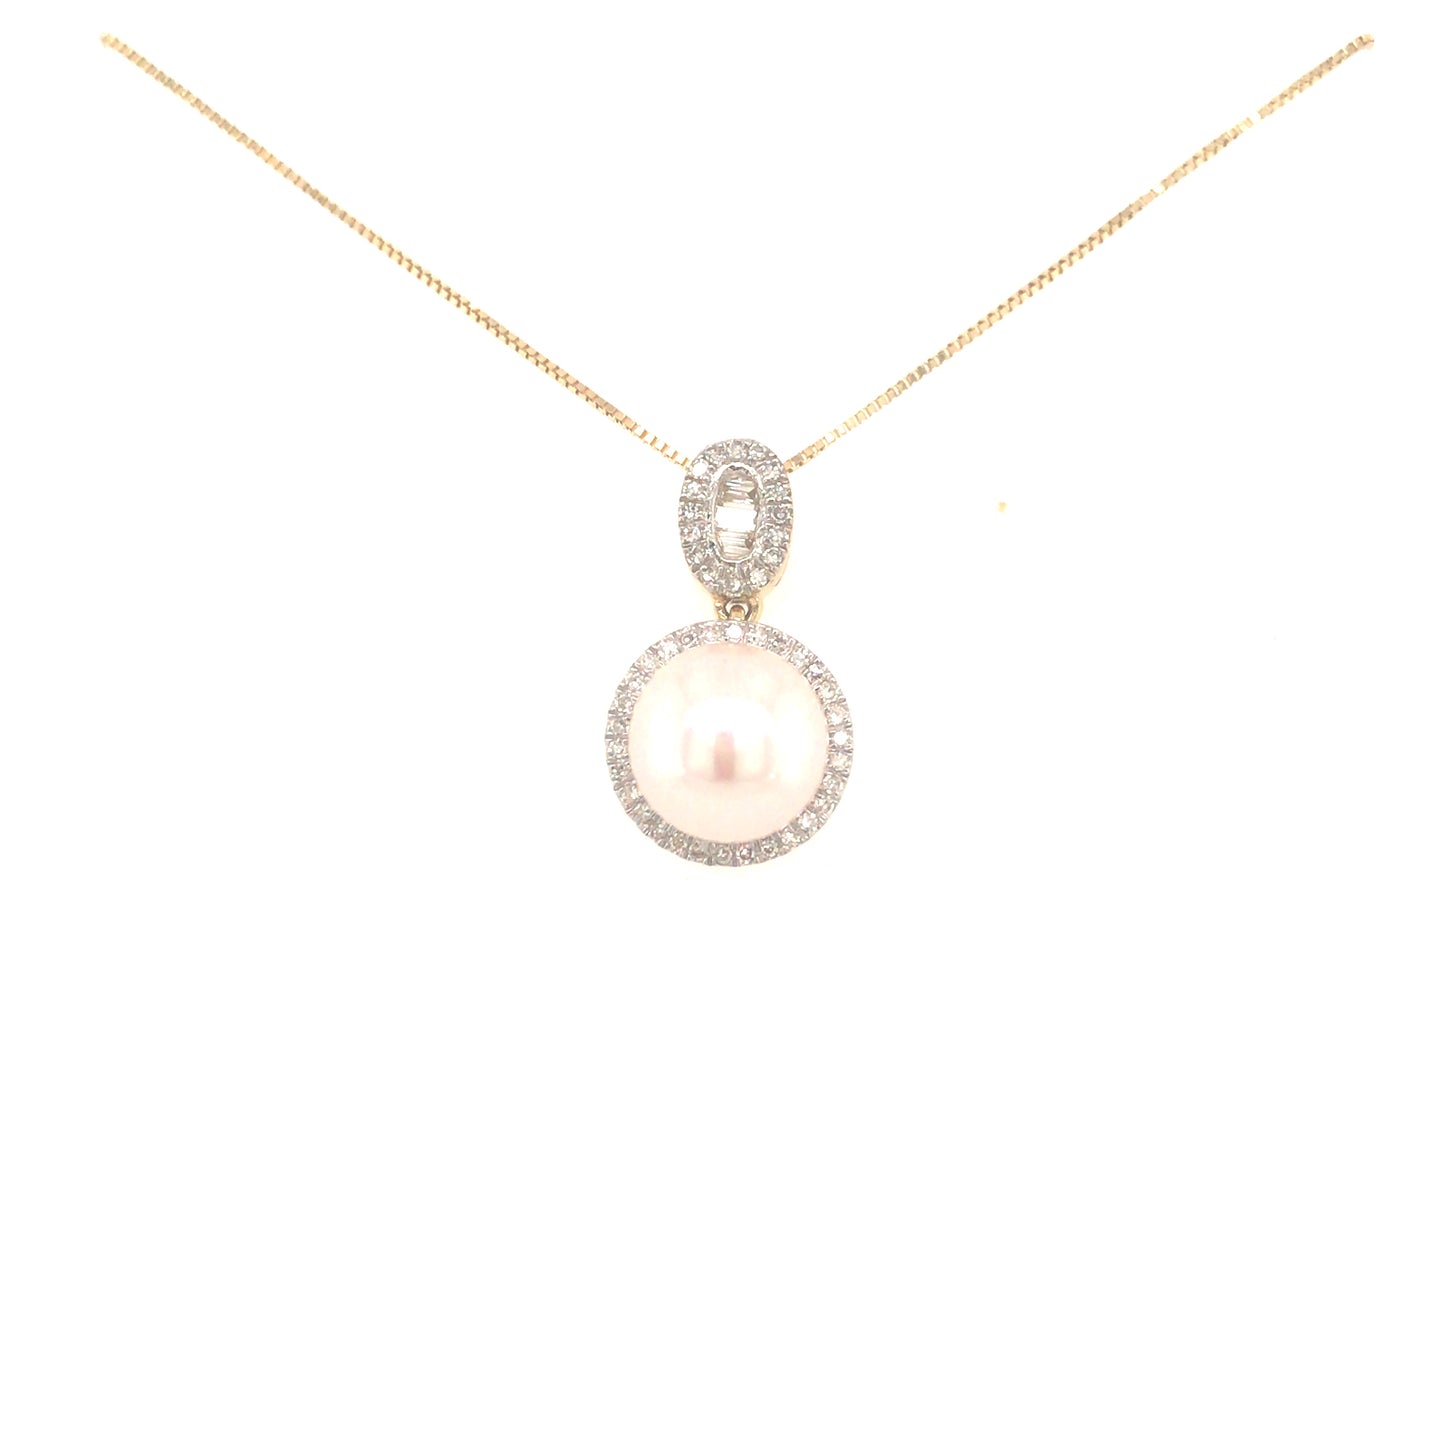 14K Gold And Diamond Framed Pearl Pendant Necklace - HK Jewels